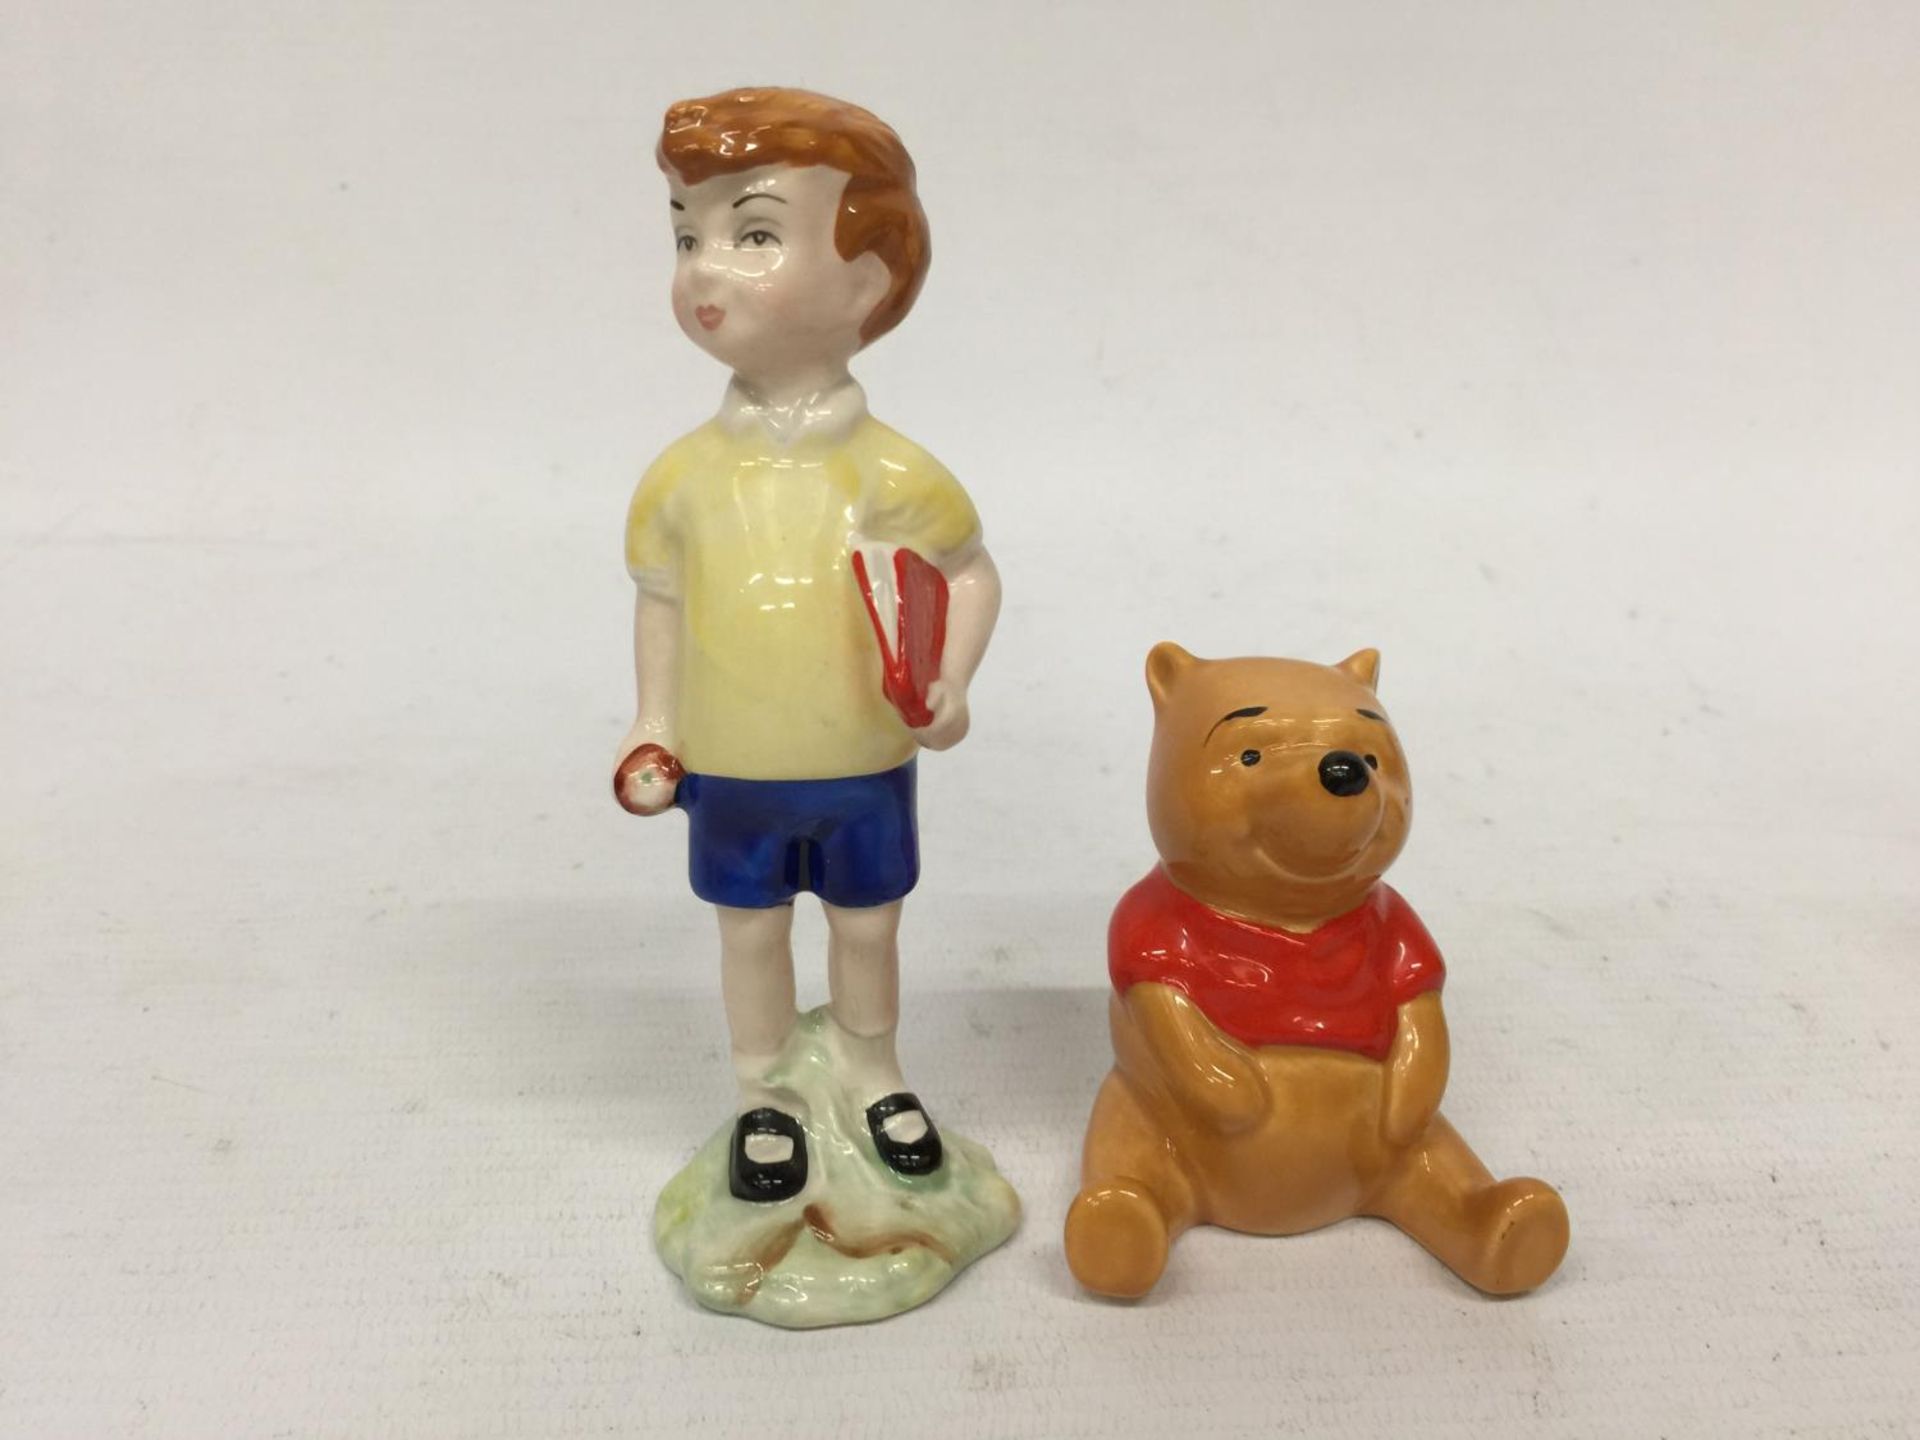 EIGHT DISNEY WINNE THE POOH FIGURES BY BESWICK - TWO WITH GOLD BACKSTAMPS - Image 3 of 6